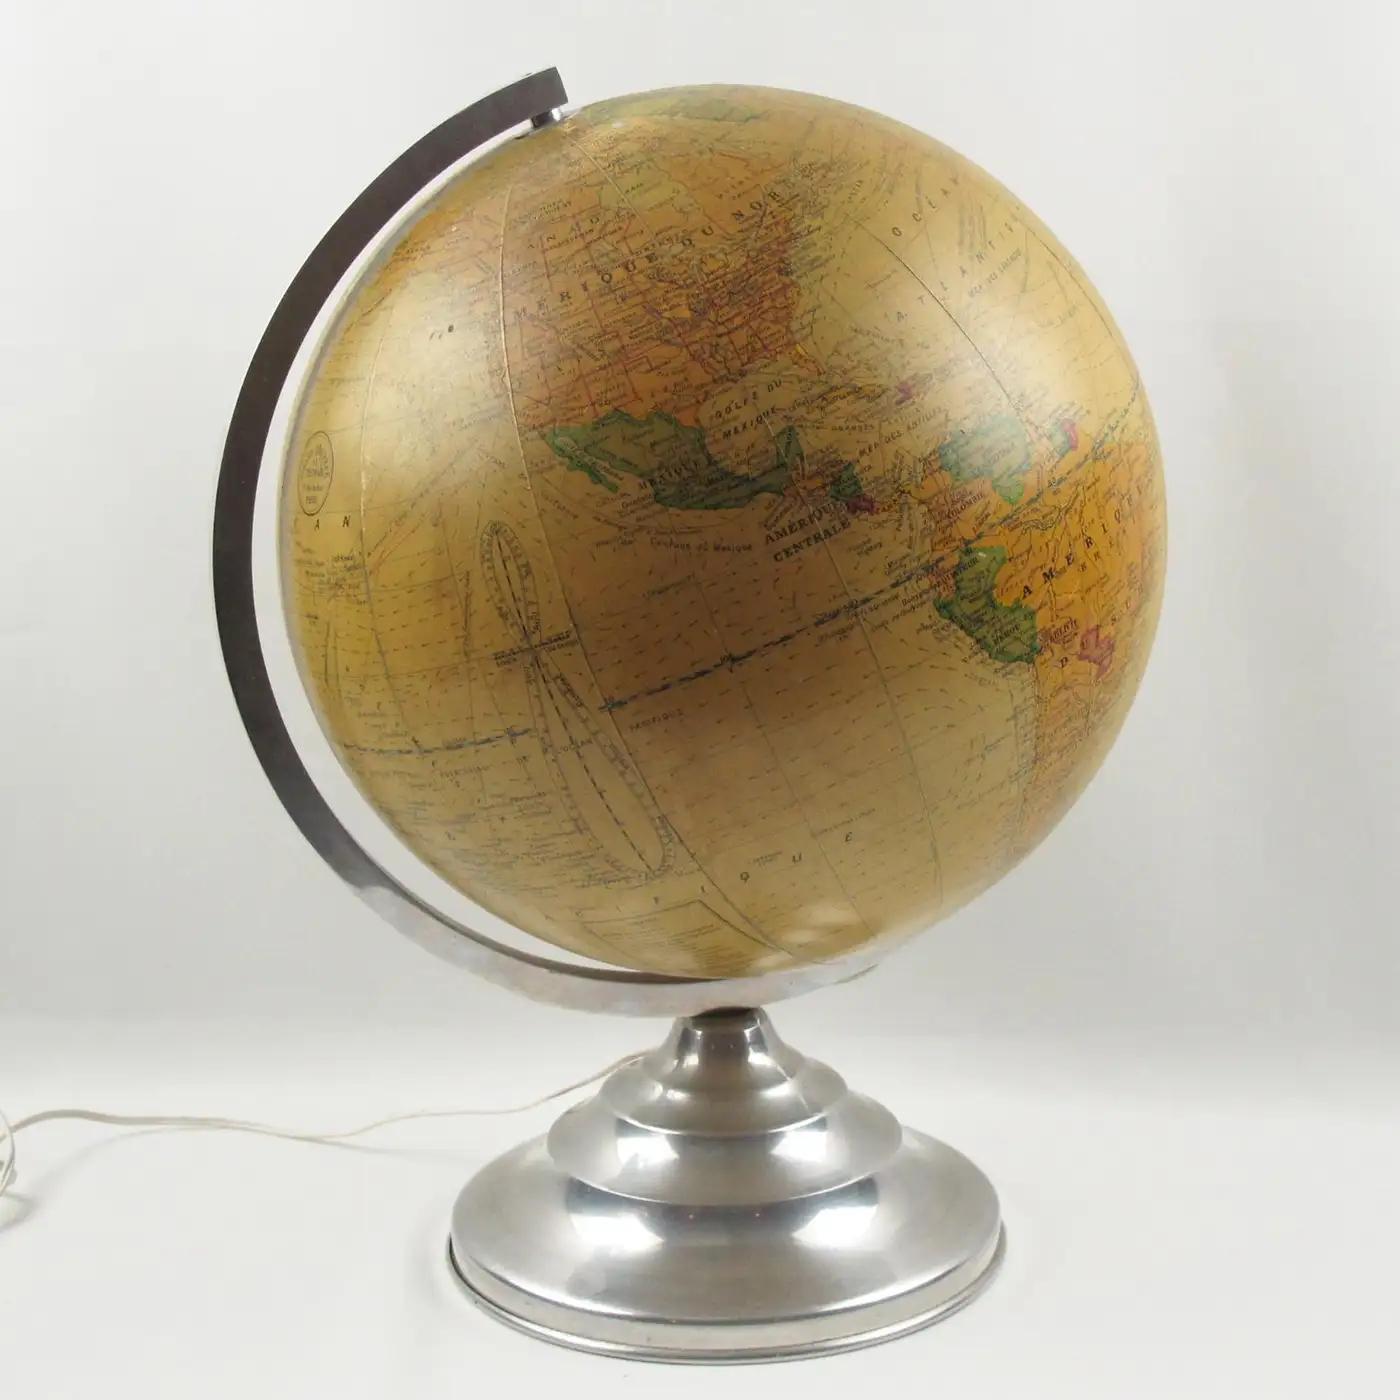 Girard, Barrere, and Thomas Paris manufactured this impressive terrestrial light-up globe in the 1950s. Geographer J. Forest designed it. This library glass globe is covered with print paper rotating on a chromed metal and aluminum stand. Besides